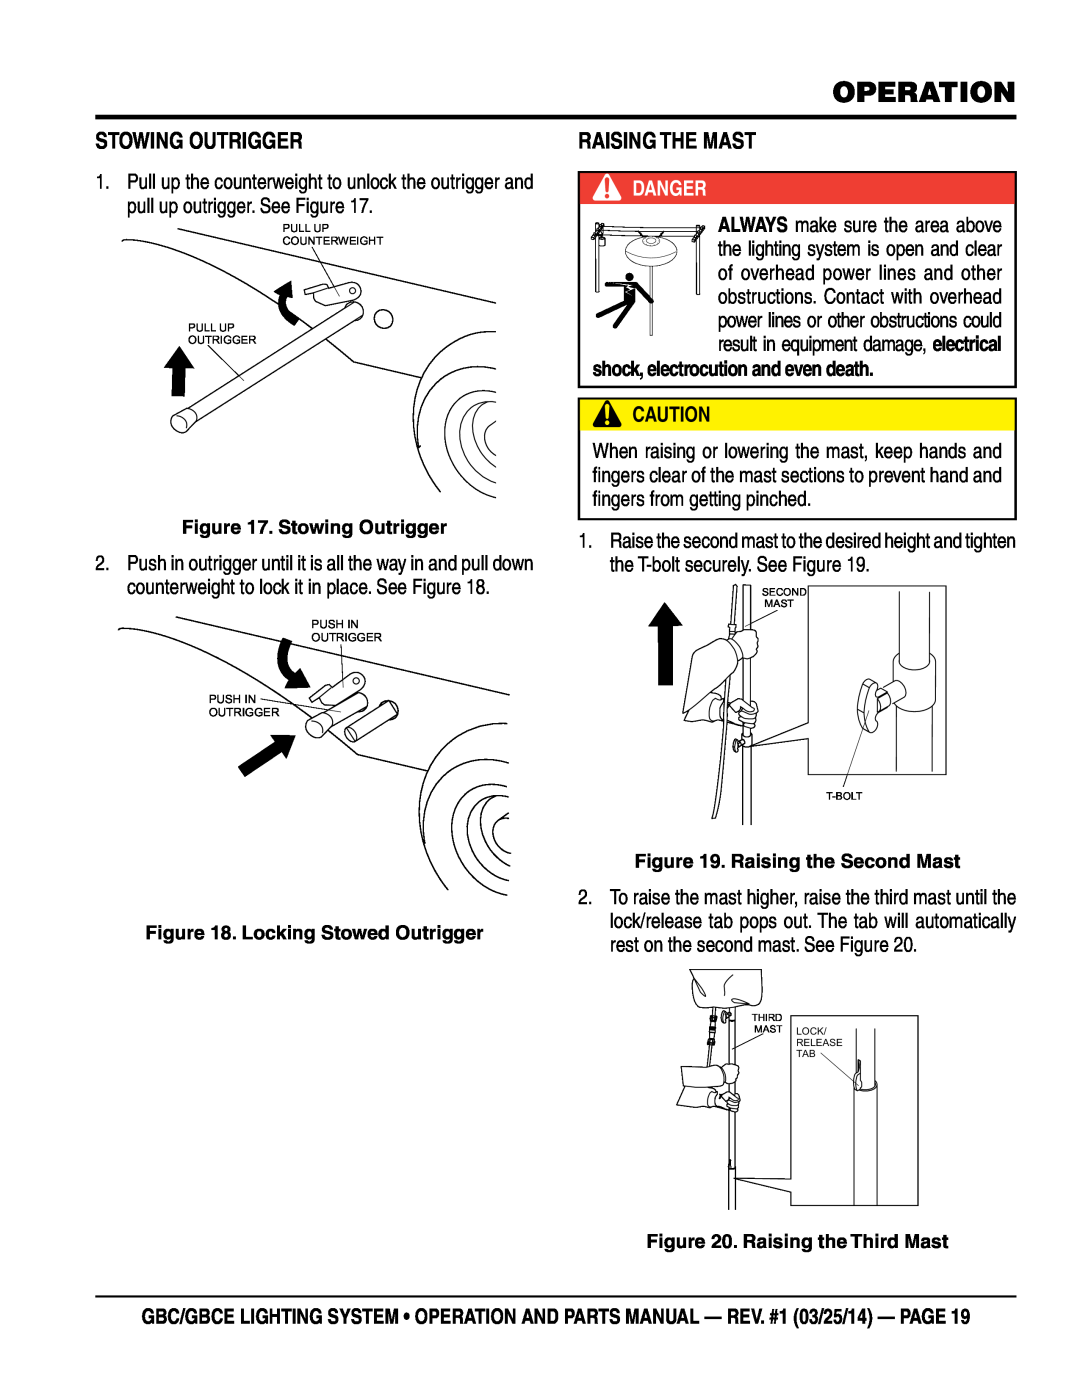 Multiquip gbe/gbce manual Stowing Outrigger, raising the mast, Danger, shock, electrocution and even death, operation 